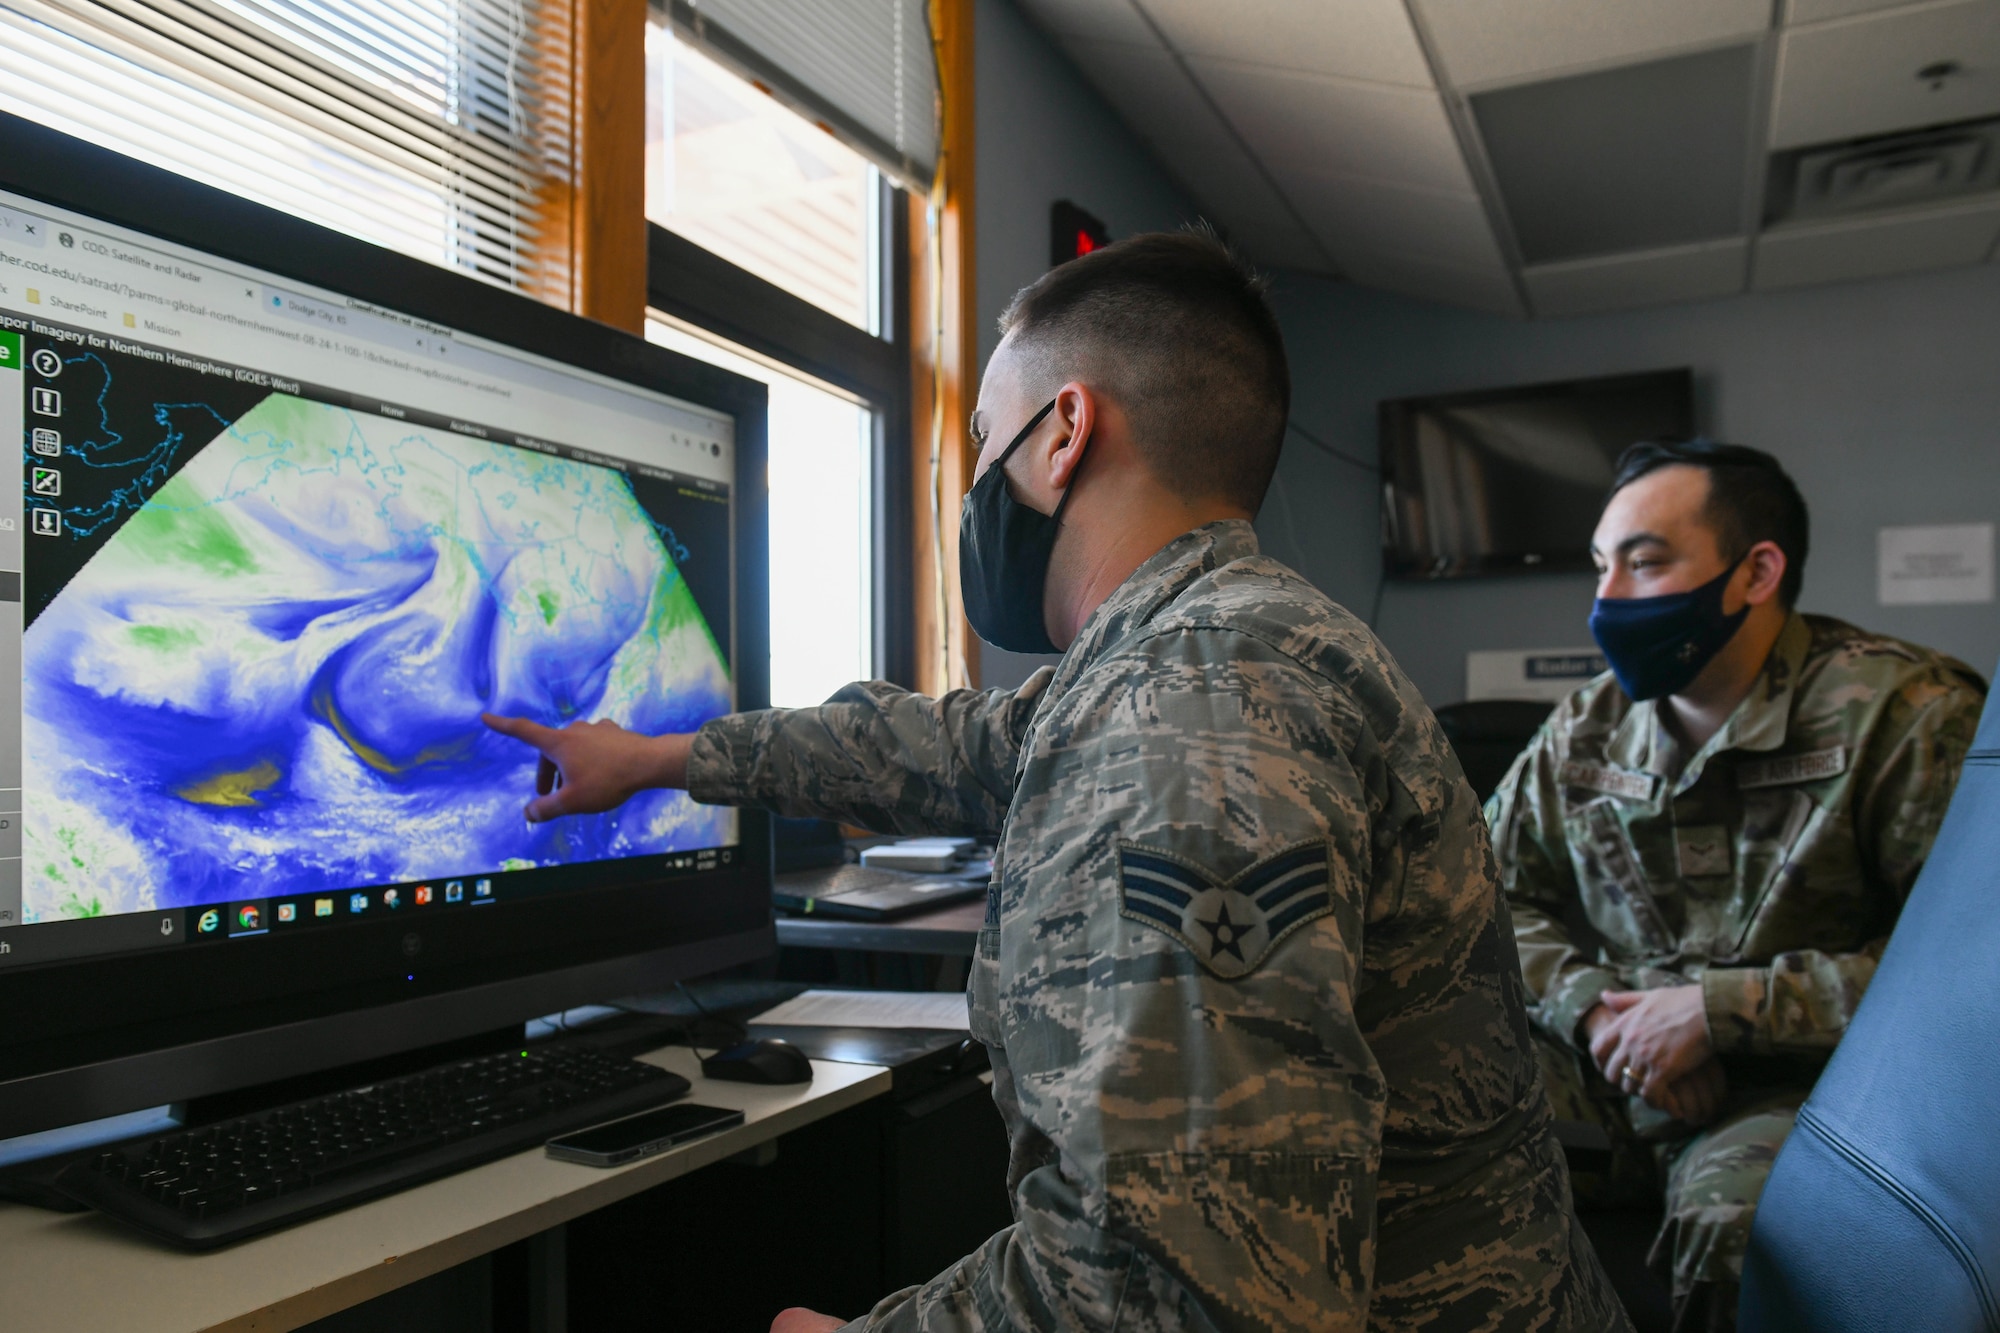 Senior Airman Jonah Reeves, 22nd Operations Support Squadron weather forecaster, discuses water vapor bands March 3, 2021, at McConnell Air Force Base, Kansas. The system is effectively utilized for identifying large scale patterns in the upper troposphere, jet streams and regions where the potential for turbulence exists. (U.S. Air Force photo by Senior Airman Nilsa Garcia)